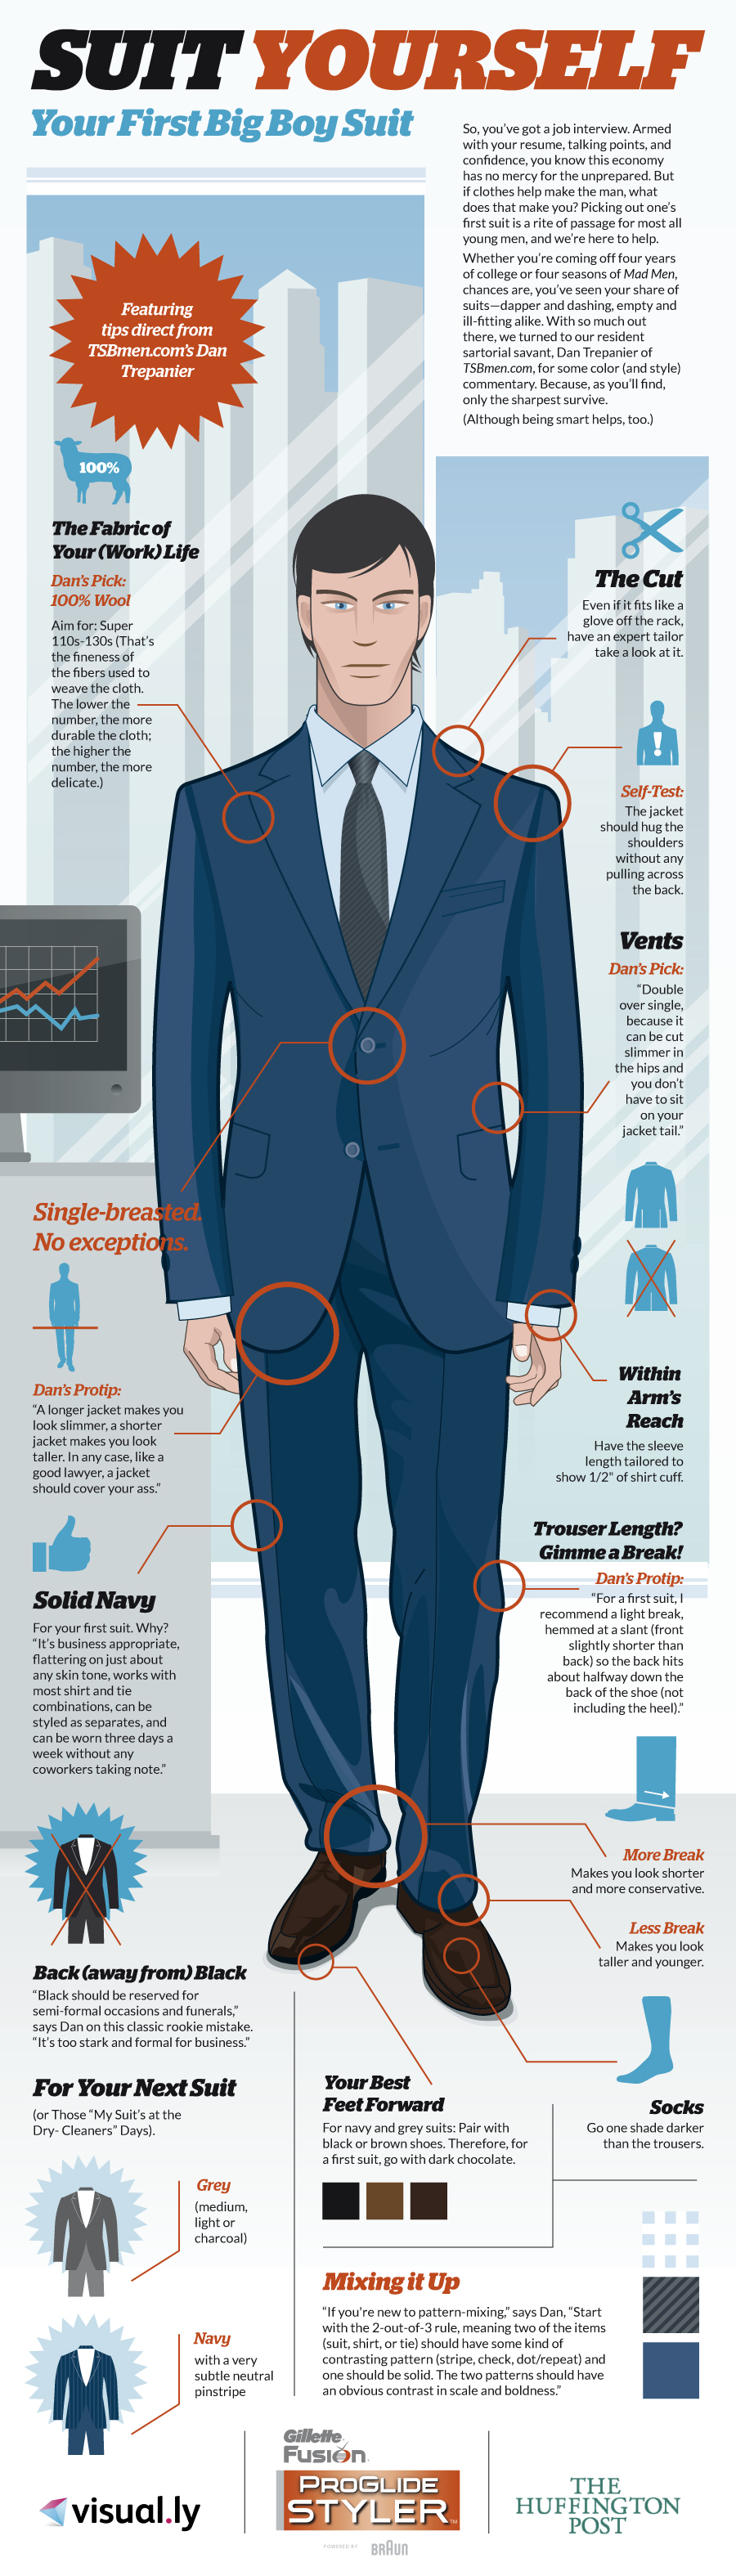 Suit Yourself: Your First Big Boy Suit!